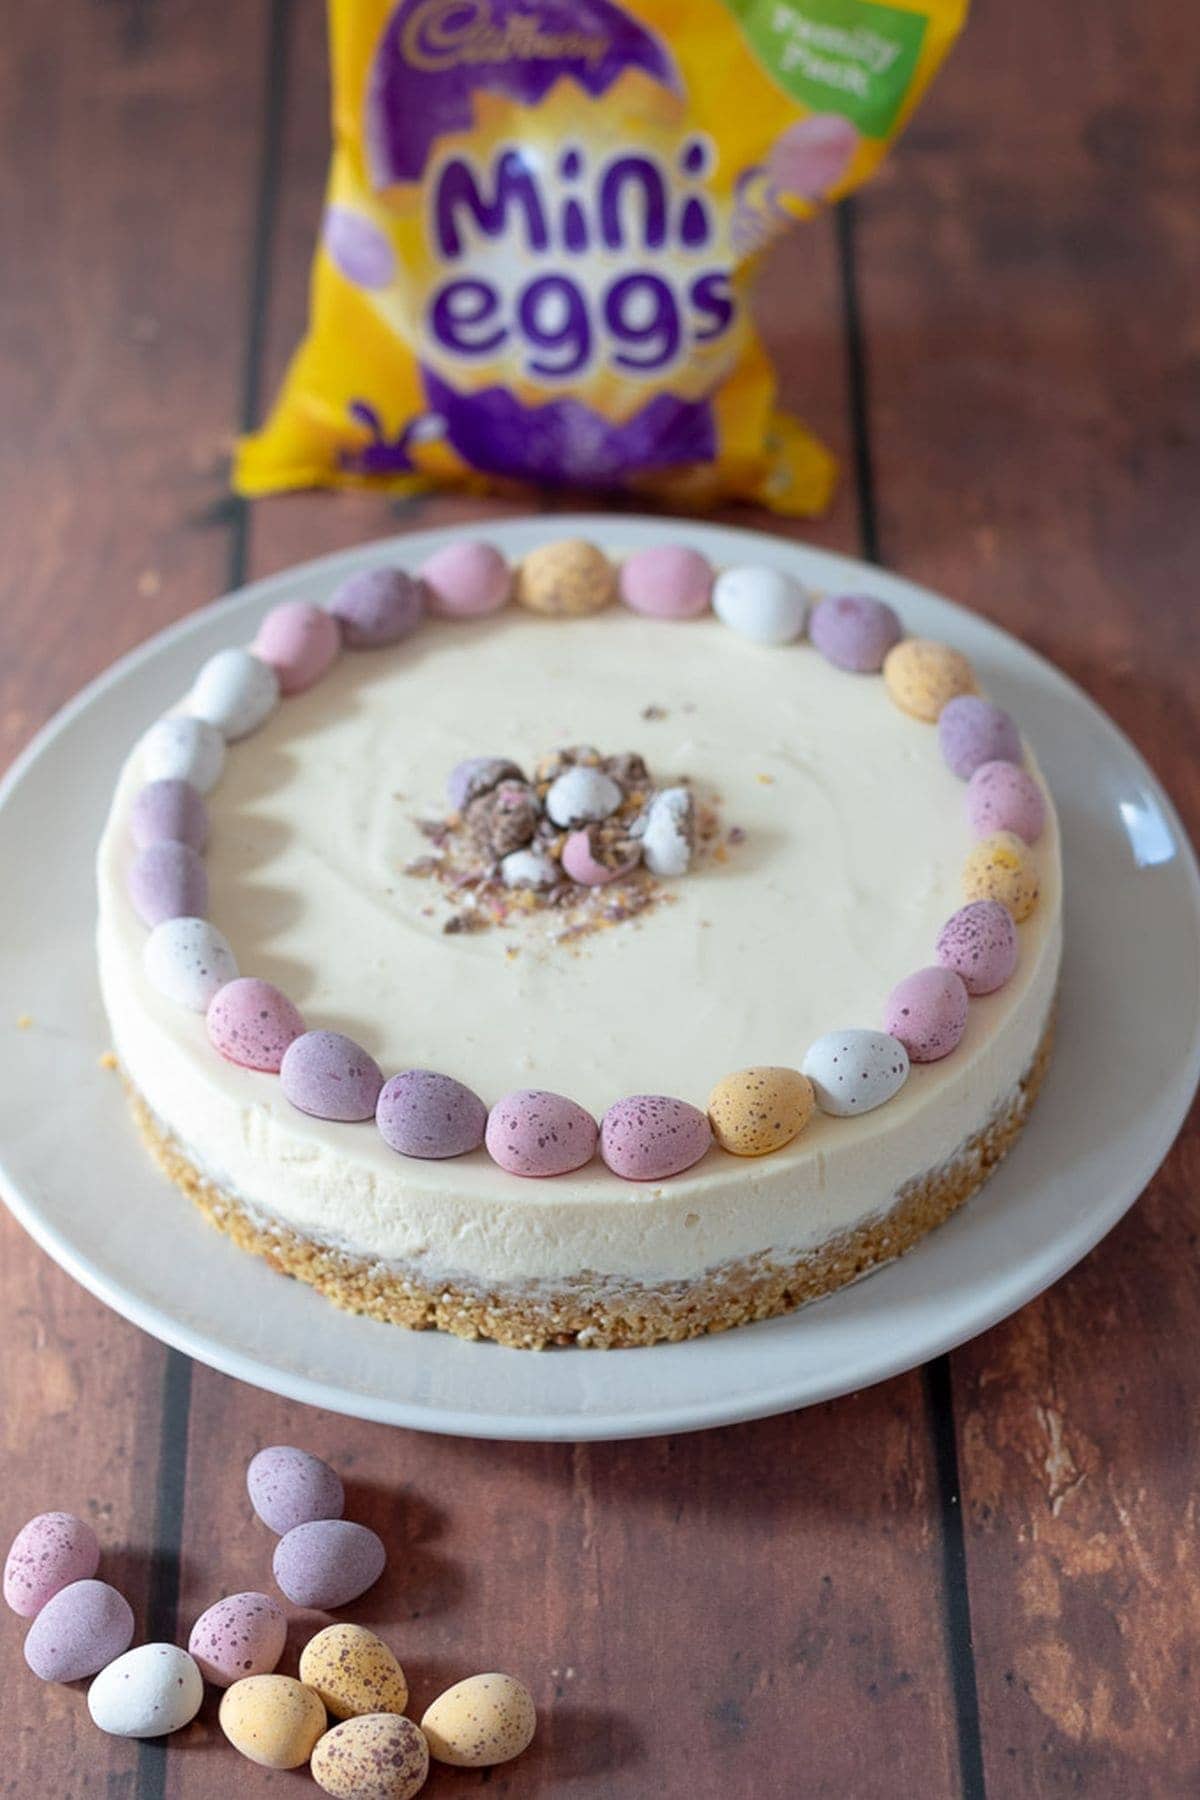 Freshly decorated easy no-bake mini egg Easter cheesecake ready to be sliced and served with a packed of mini eggs in the background.